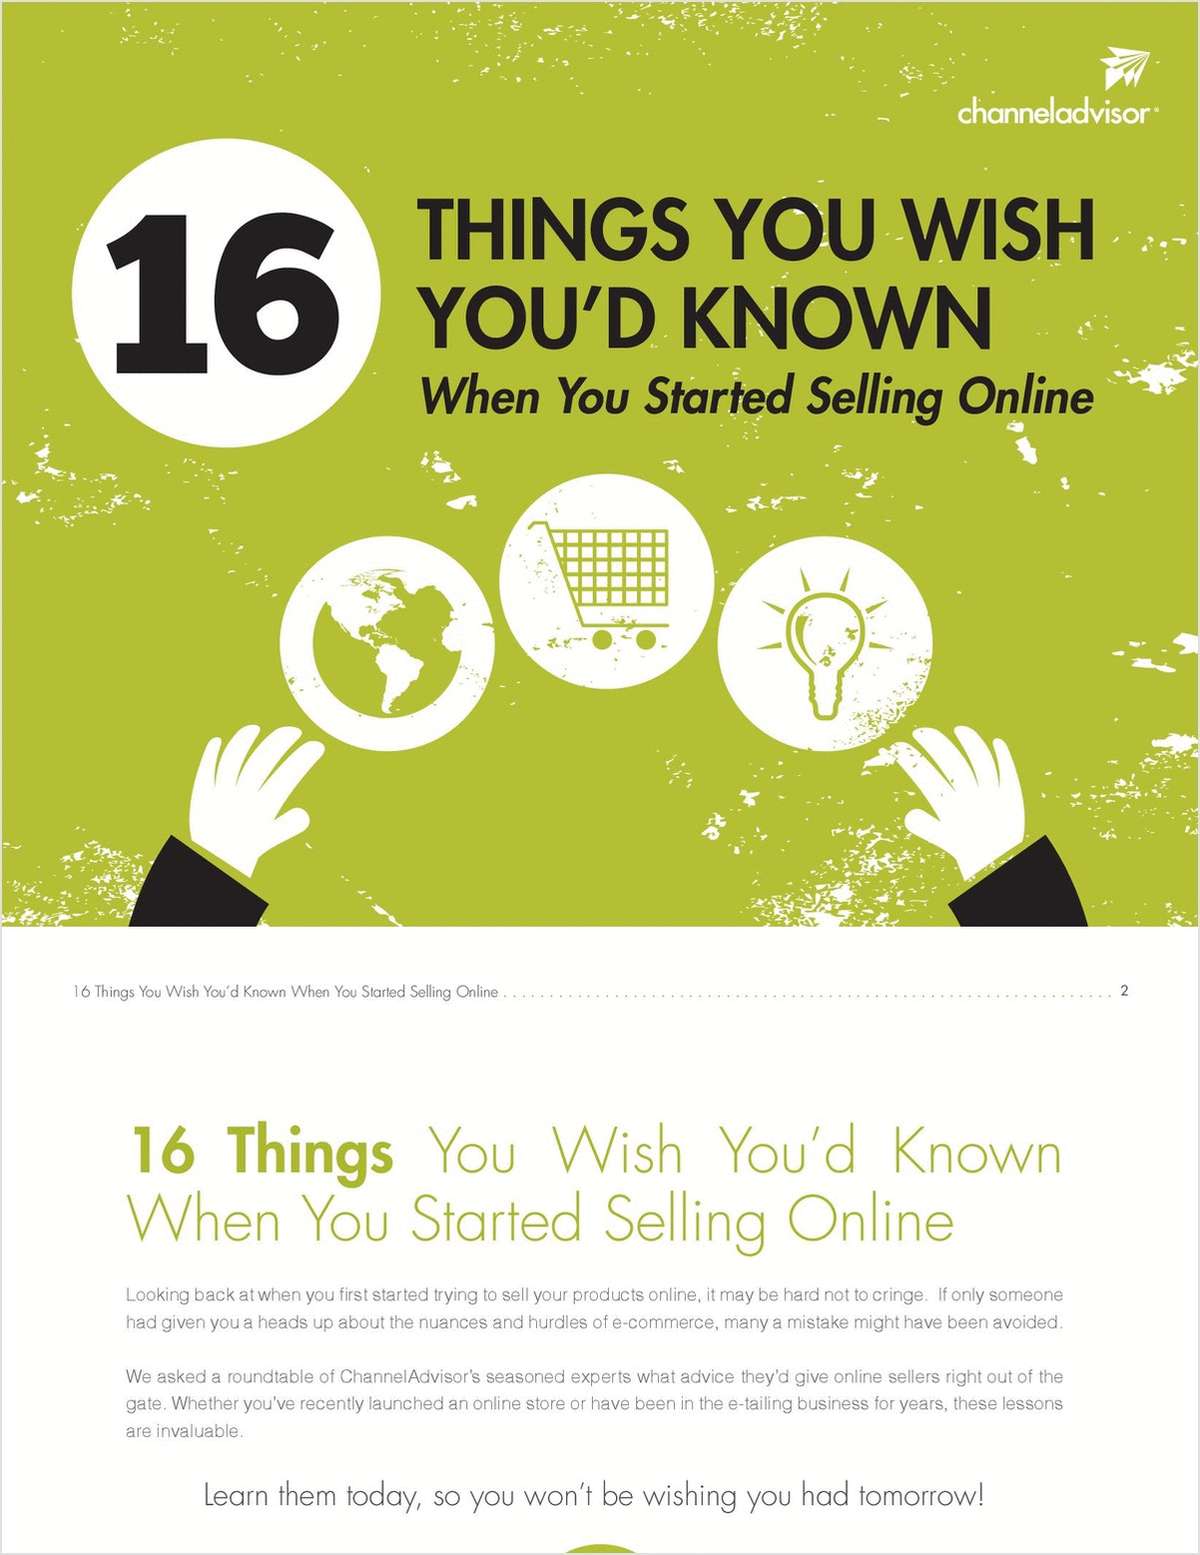 16 Things You Wish You'd Known When You Started Selling Online